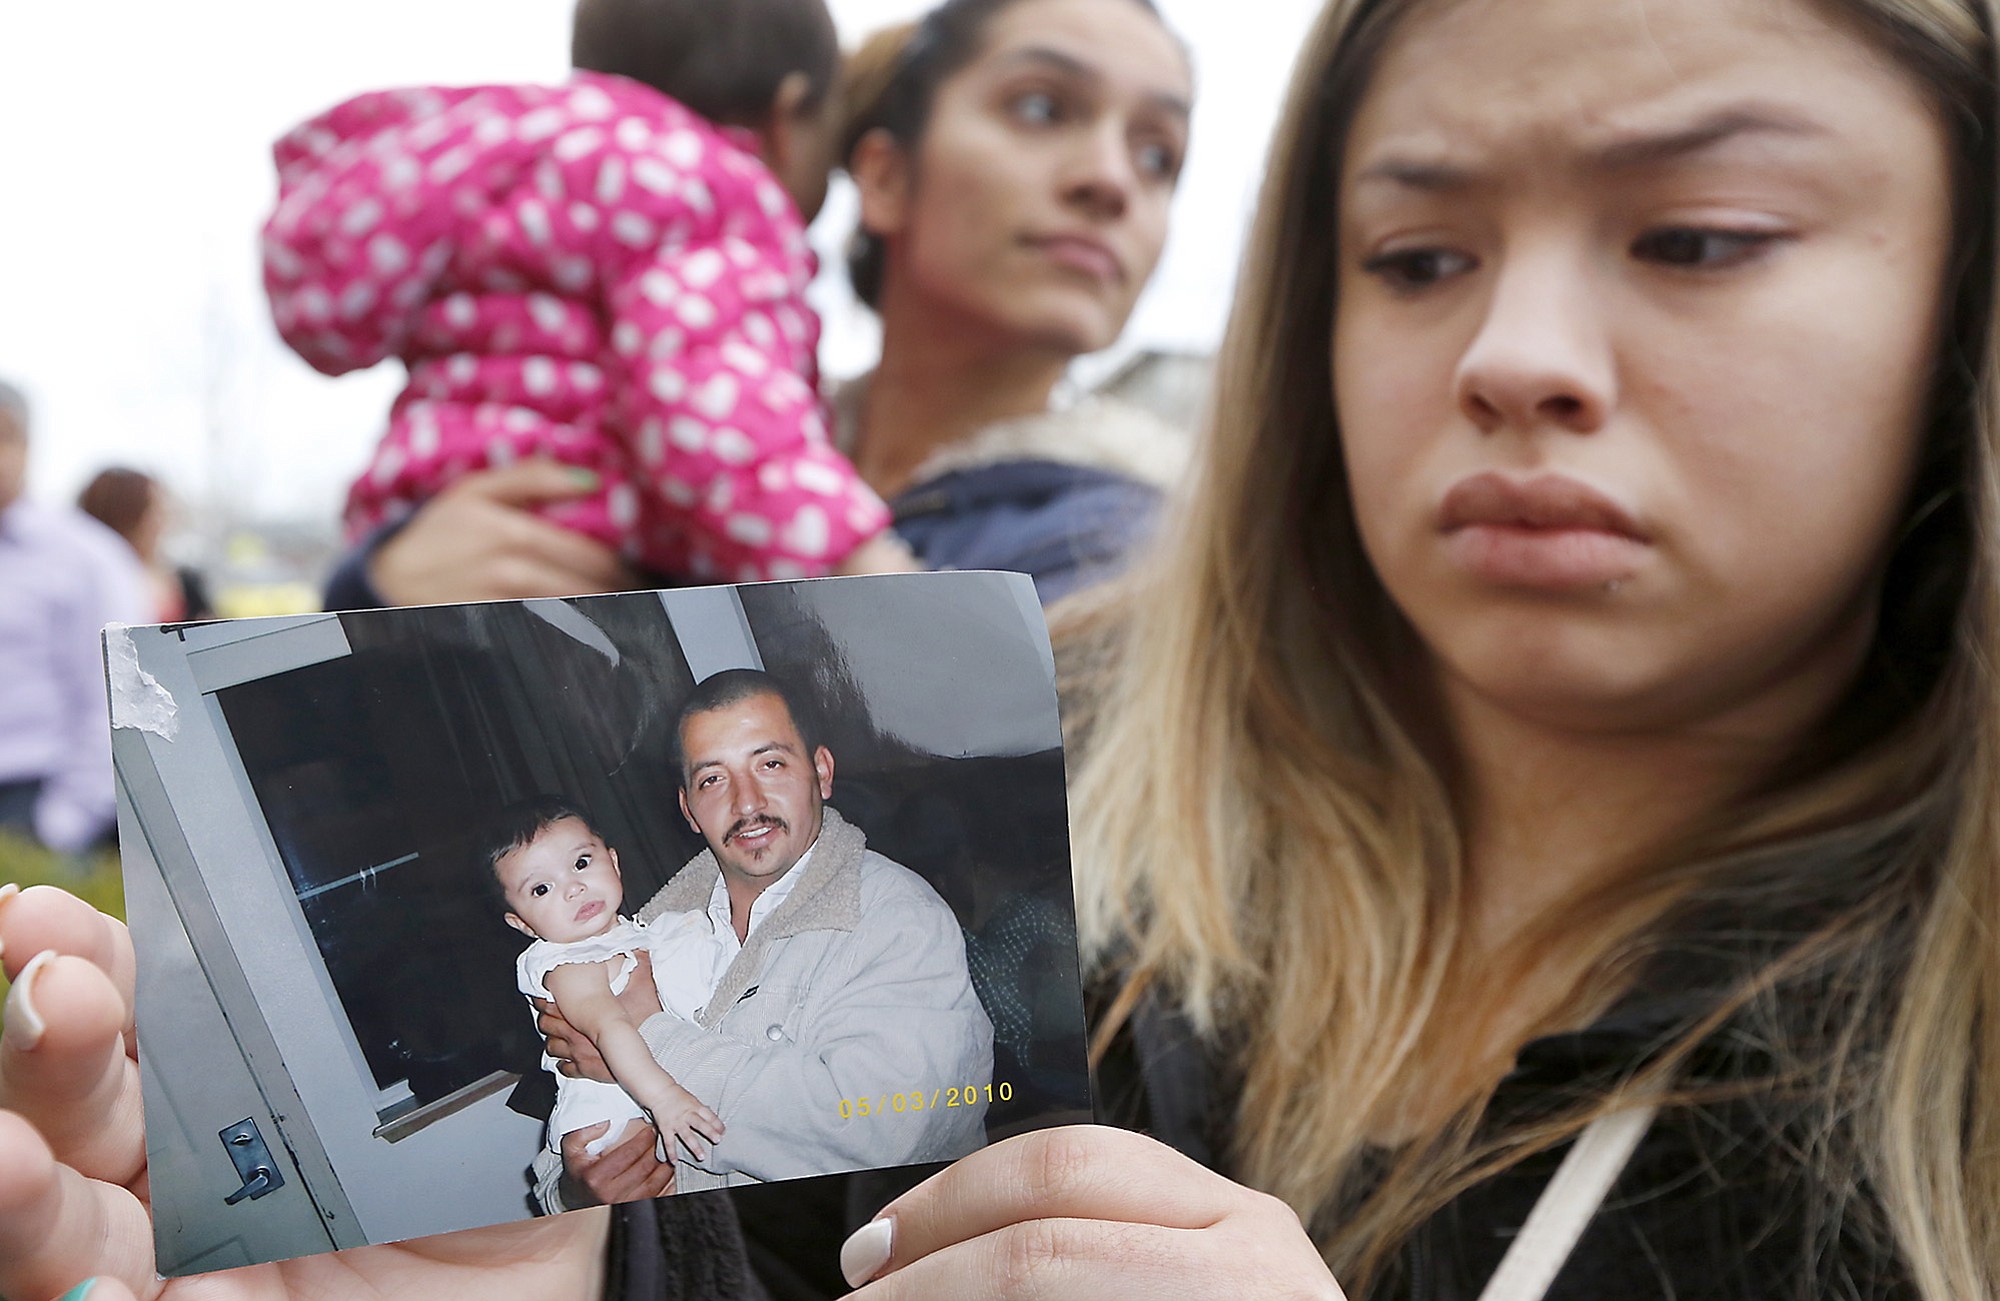 Erika Zambrano holds a 2010 photo of shooting victim Antonio Zambrano-Montes, Wednesday, Feb. 11, 2015, while standing outside the city hall building in Pasco, Wash. A rally was held in support of Zambrano-Montes, who was shot and killed by Pasco police officers during a confrontation at the busy intersection.